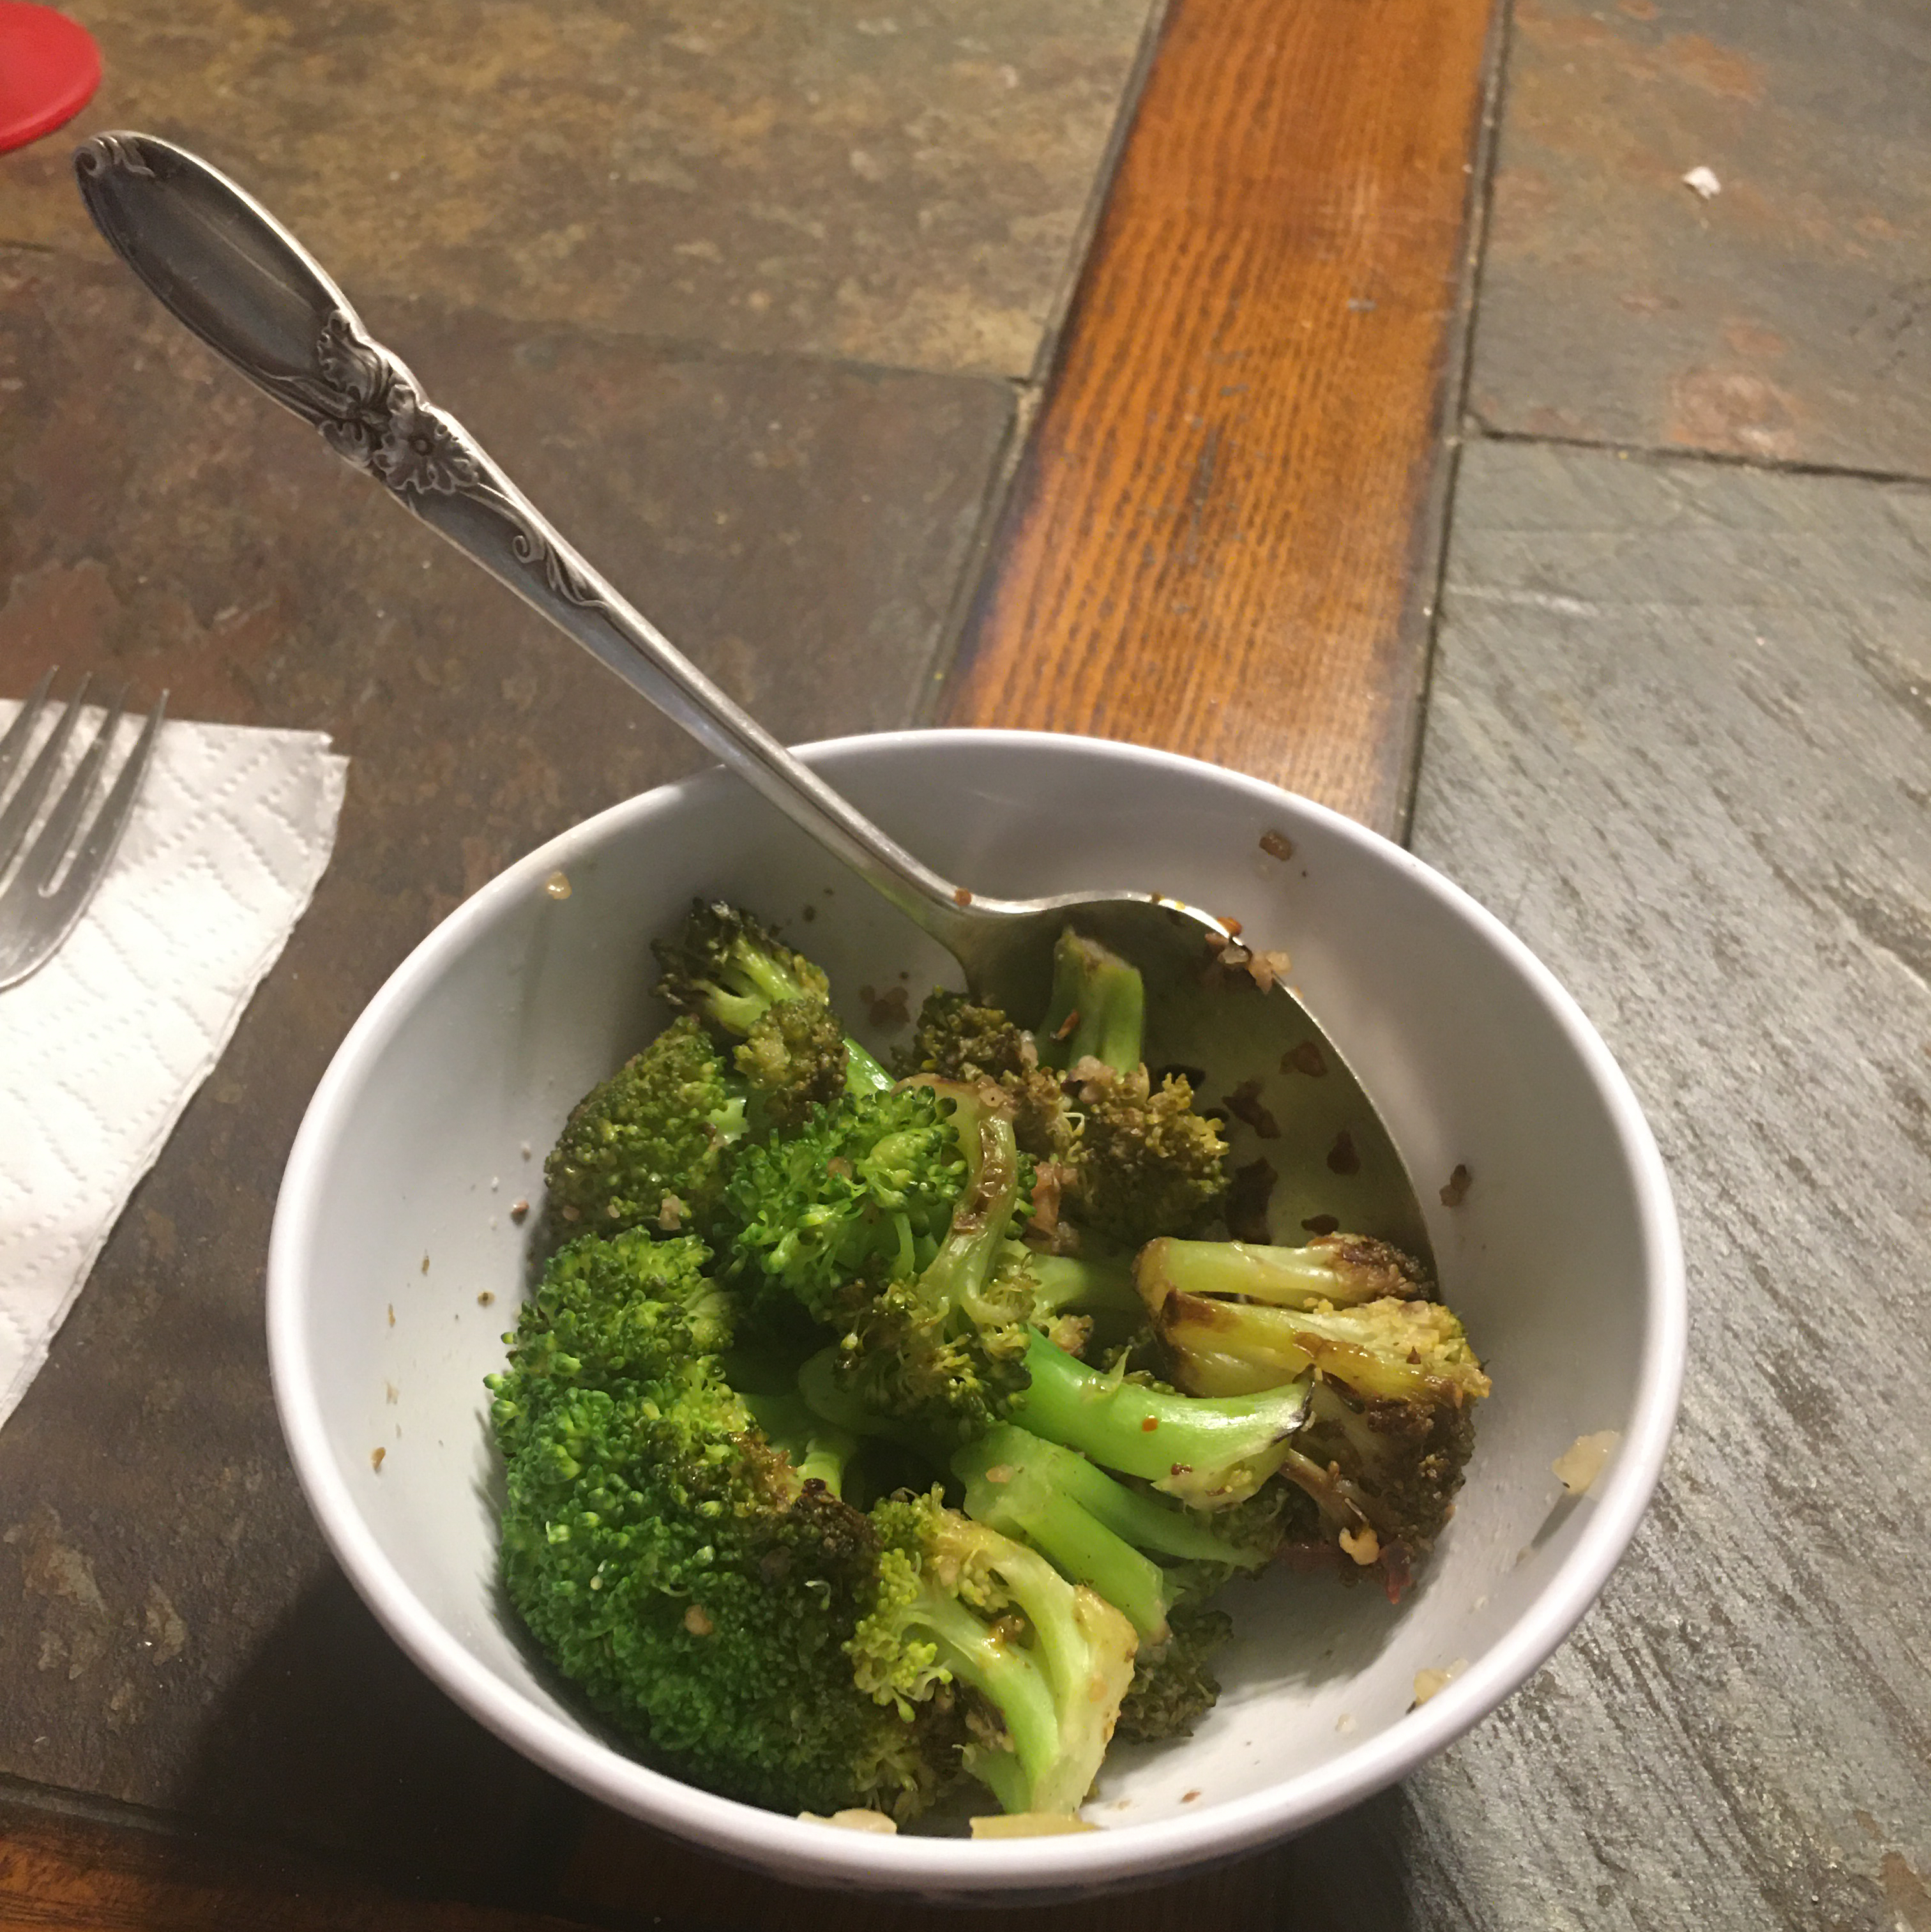 Spicy Broccoli with Parmesan Cheese